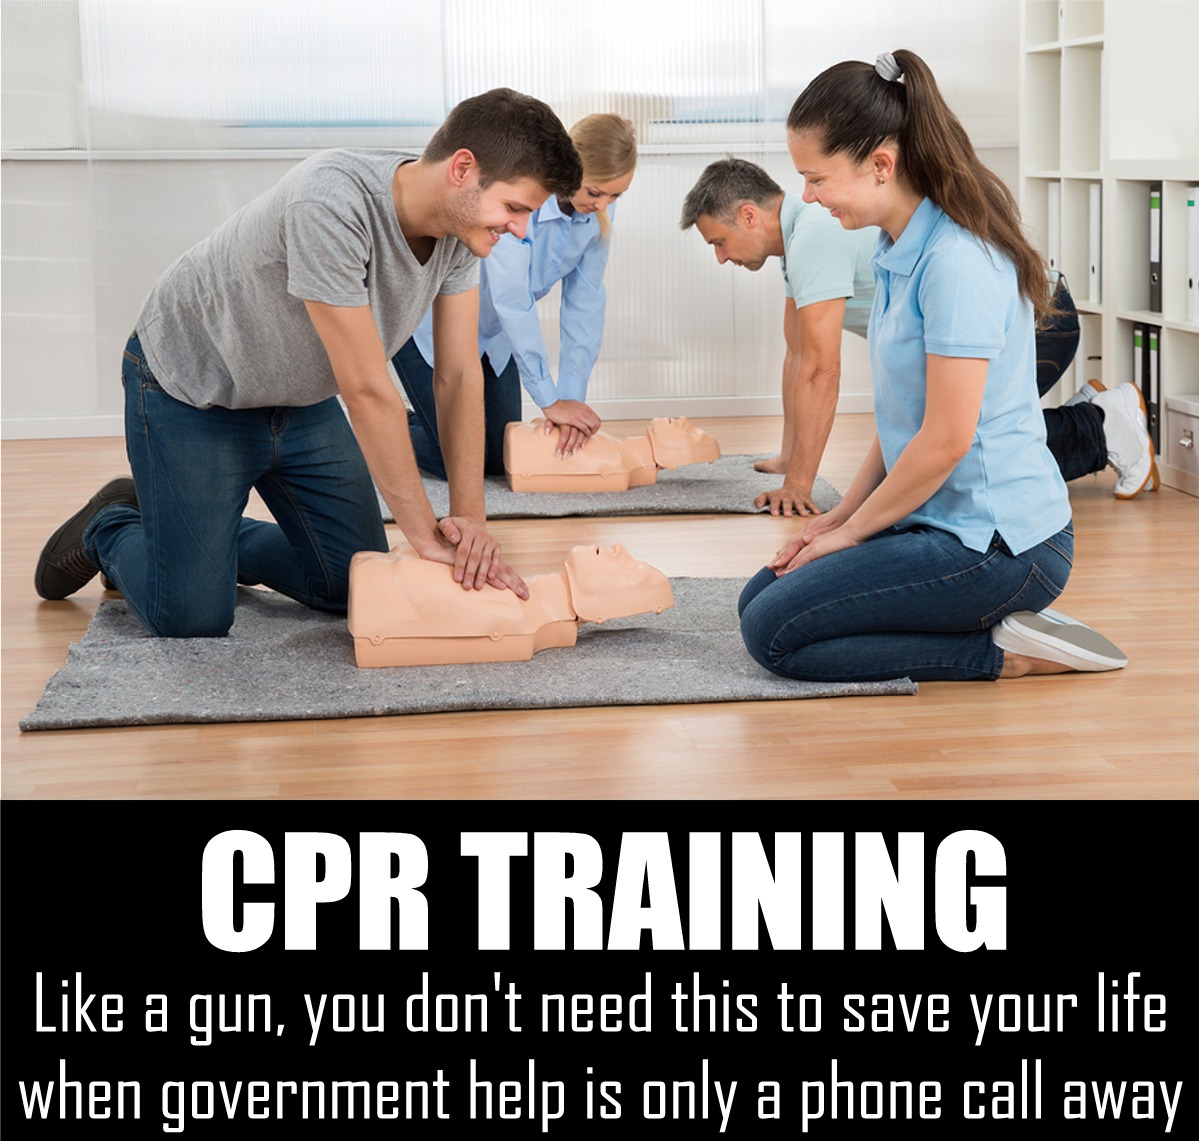 training of first aid - Cpr Training a gun, you don't need this to save your life when government help is only a phone call away